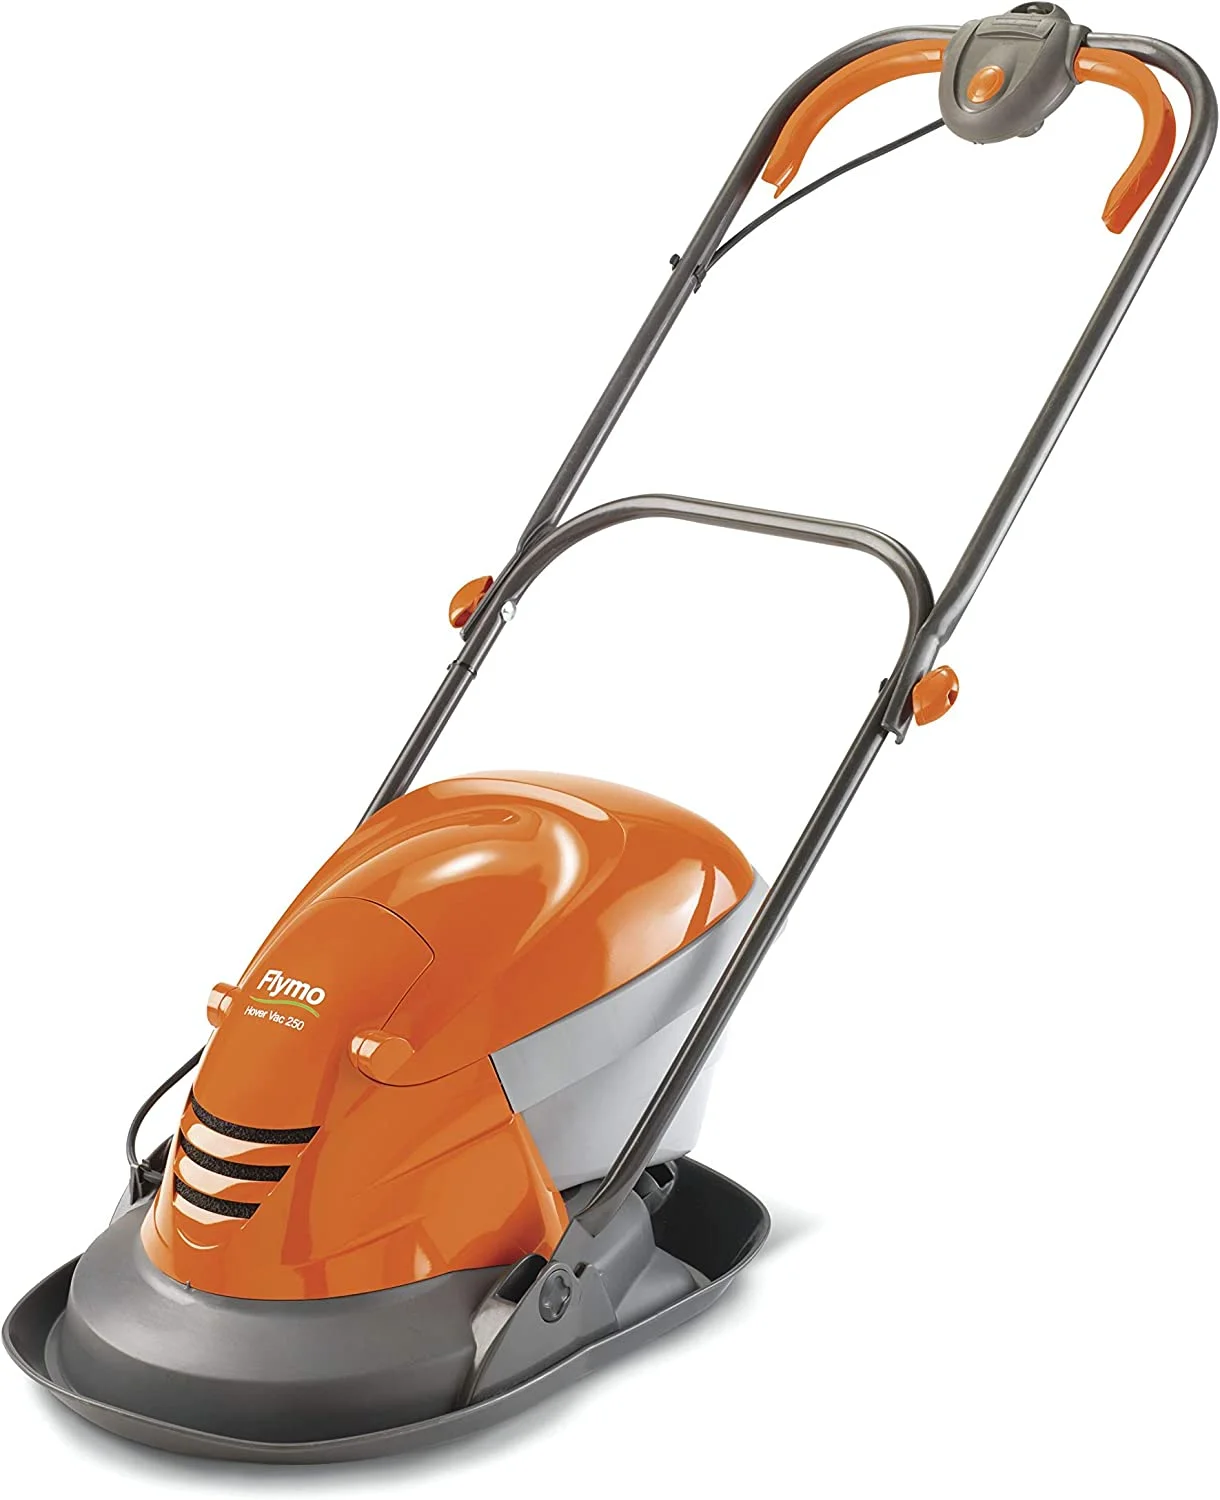 Image for Flymo Hover Vac 250 Hover Lawn Mower